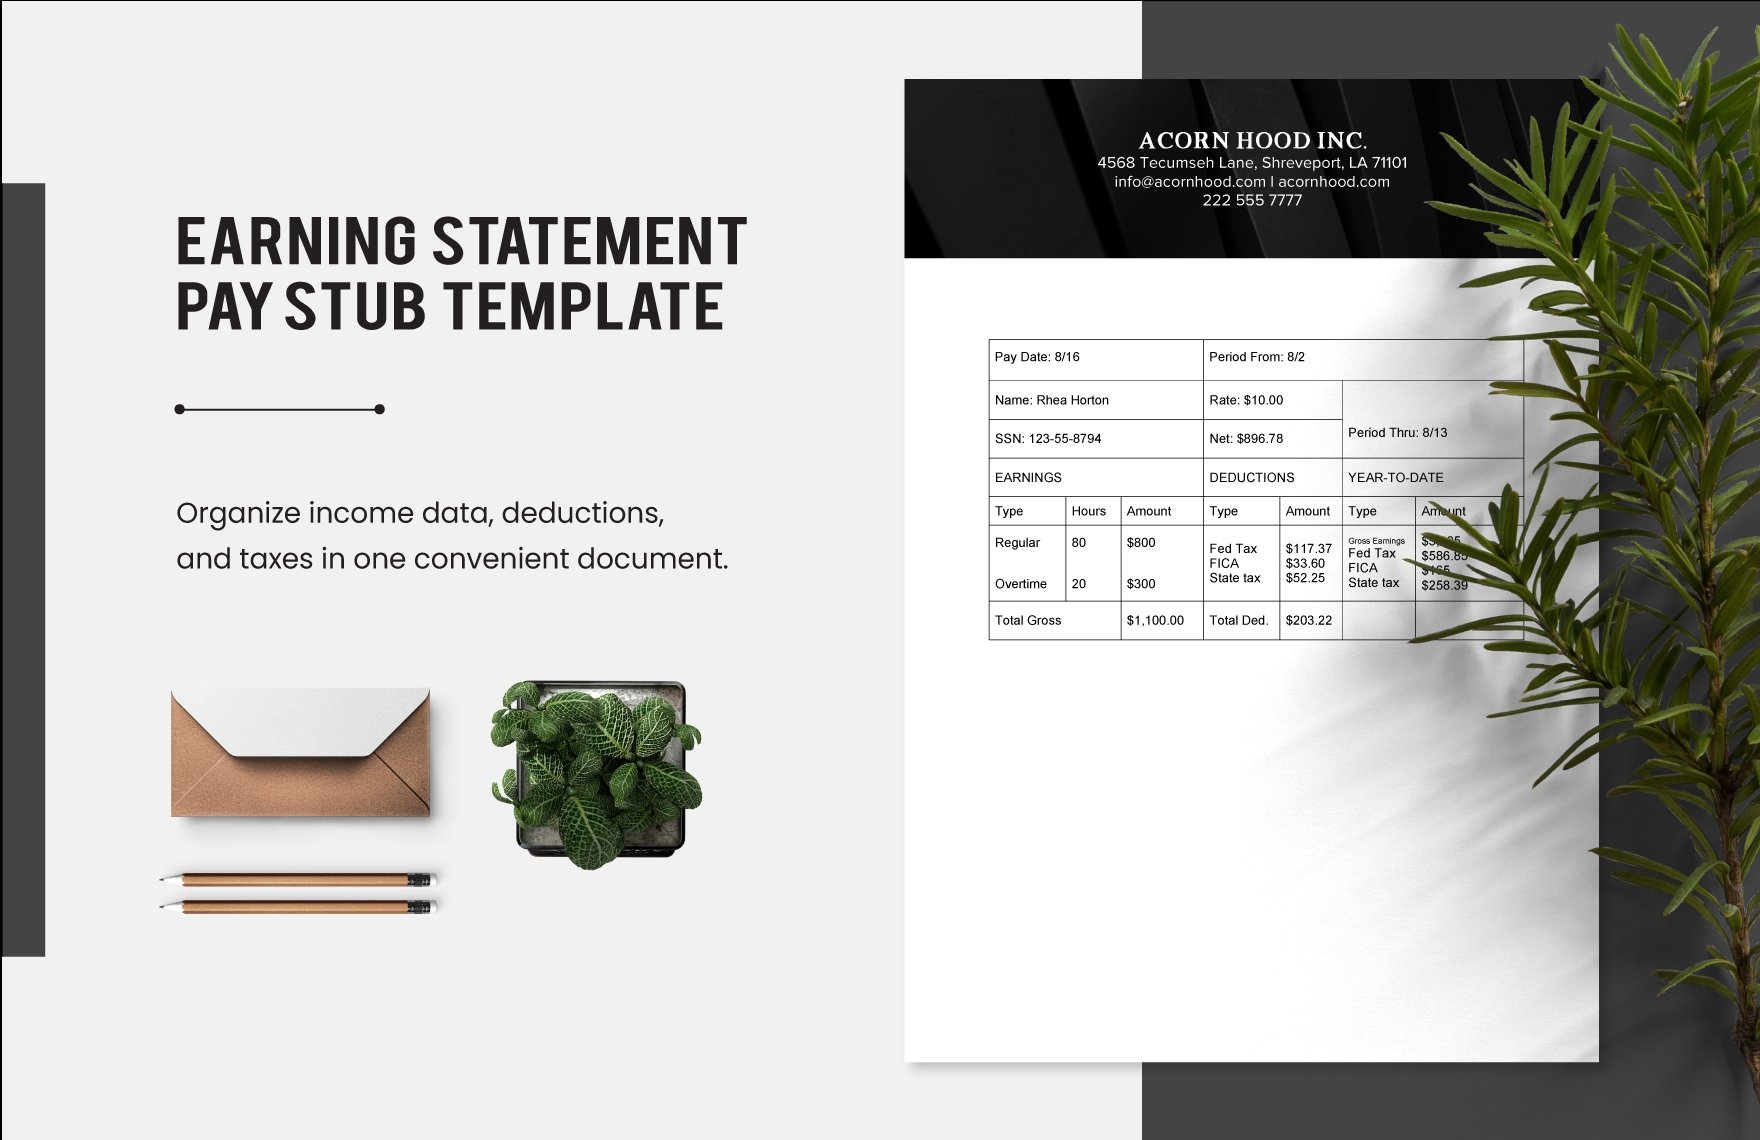 Earning Statement Pay Stub Template